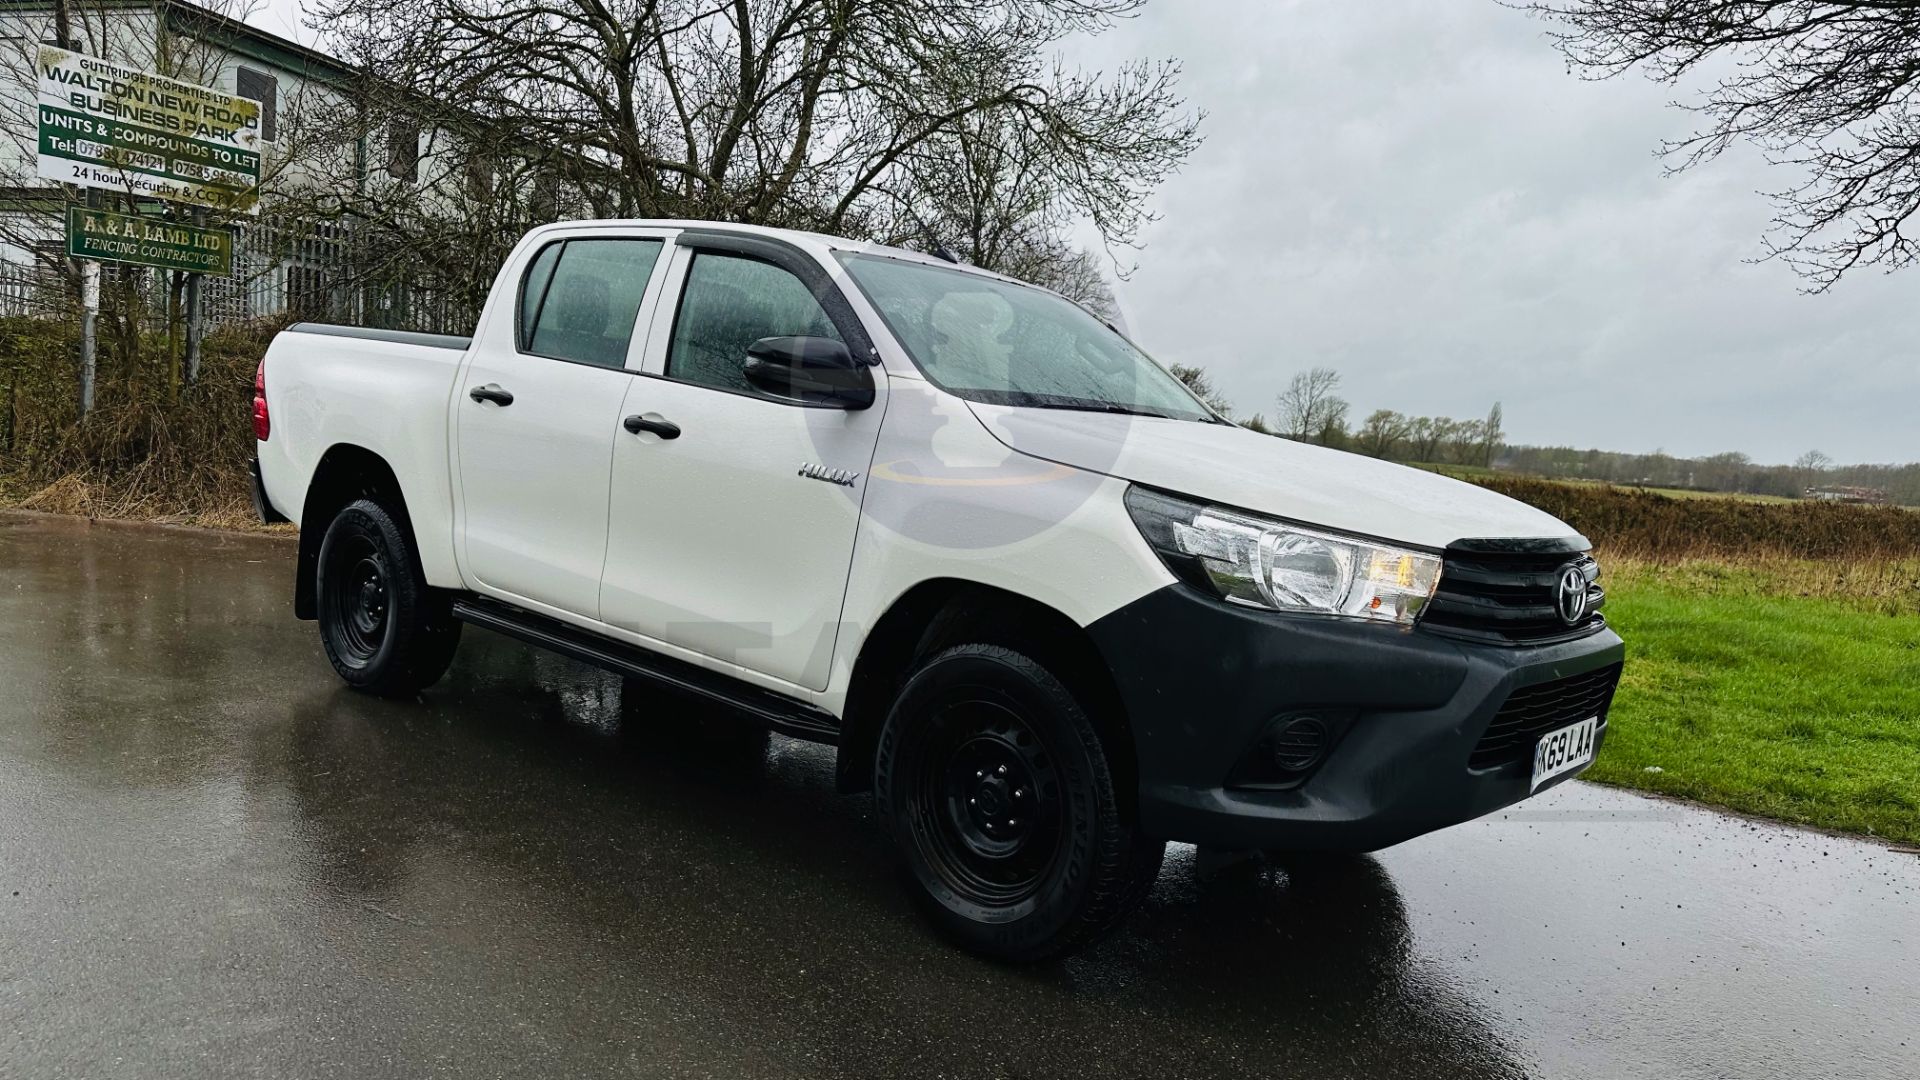 TOYOTA HILUX *DOUBLE CAB PICK-UP* (2020 - EURO 6) 2.4 D-4D - AUTO STOP/START *AIR CON* (1 OWNER) - Image 7 of 48